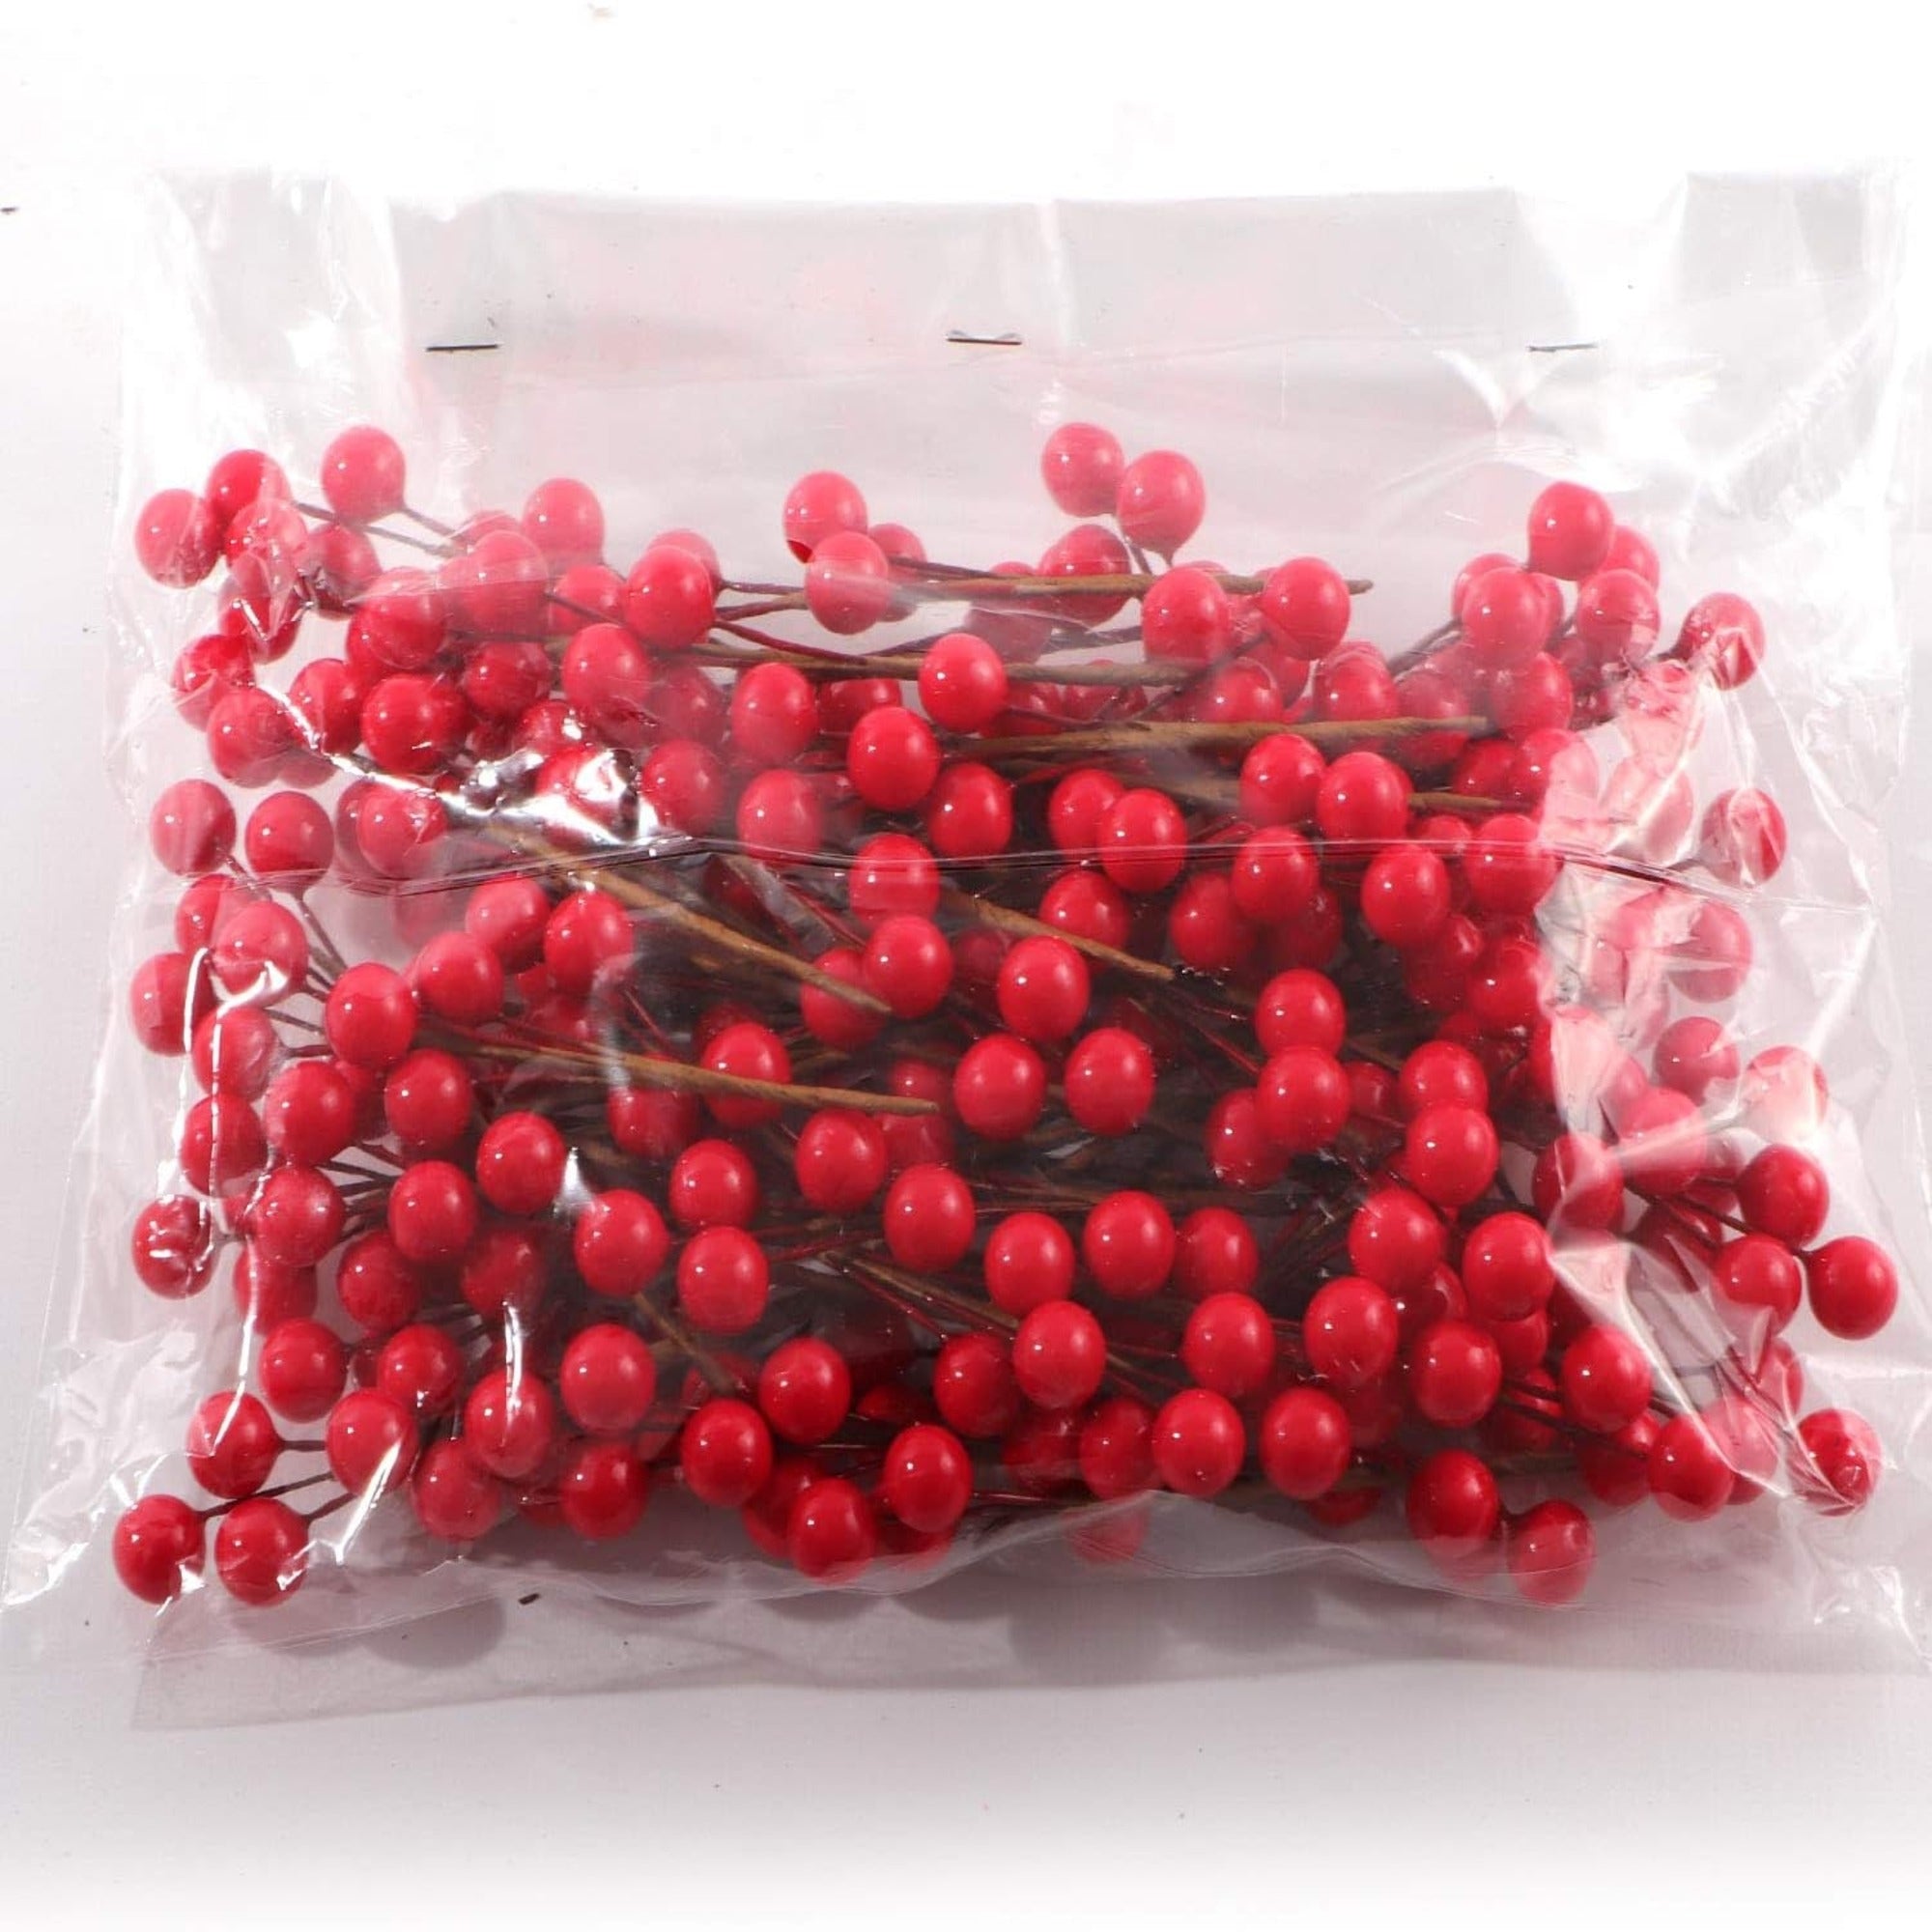 Mini Holly Berry Picks with Realistic Red Berries - 10mm | Christmas Tree, Wreath, Garland Decorations | Perfect for Holiday Gift Wrapping & Home Office Decor | Bulk Pack of 8 Dozen (96 Total)